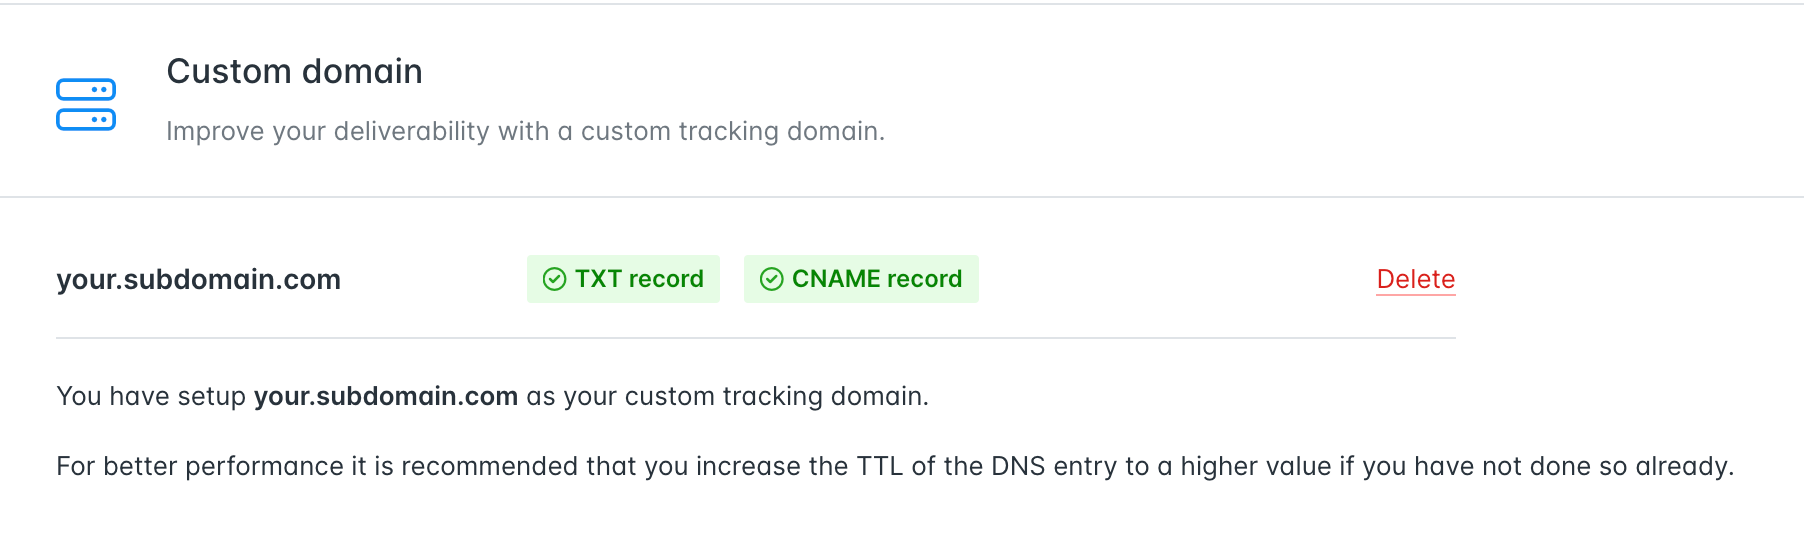 Hunter Campaigns user interface for implementing a custom tracking domain